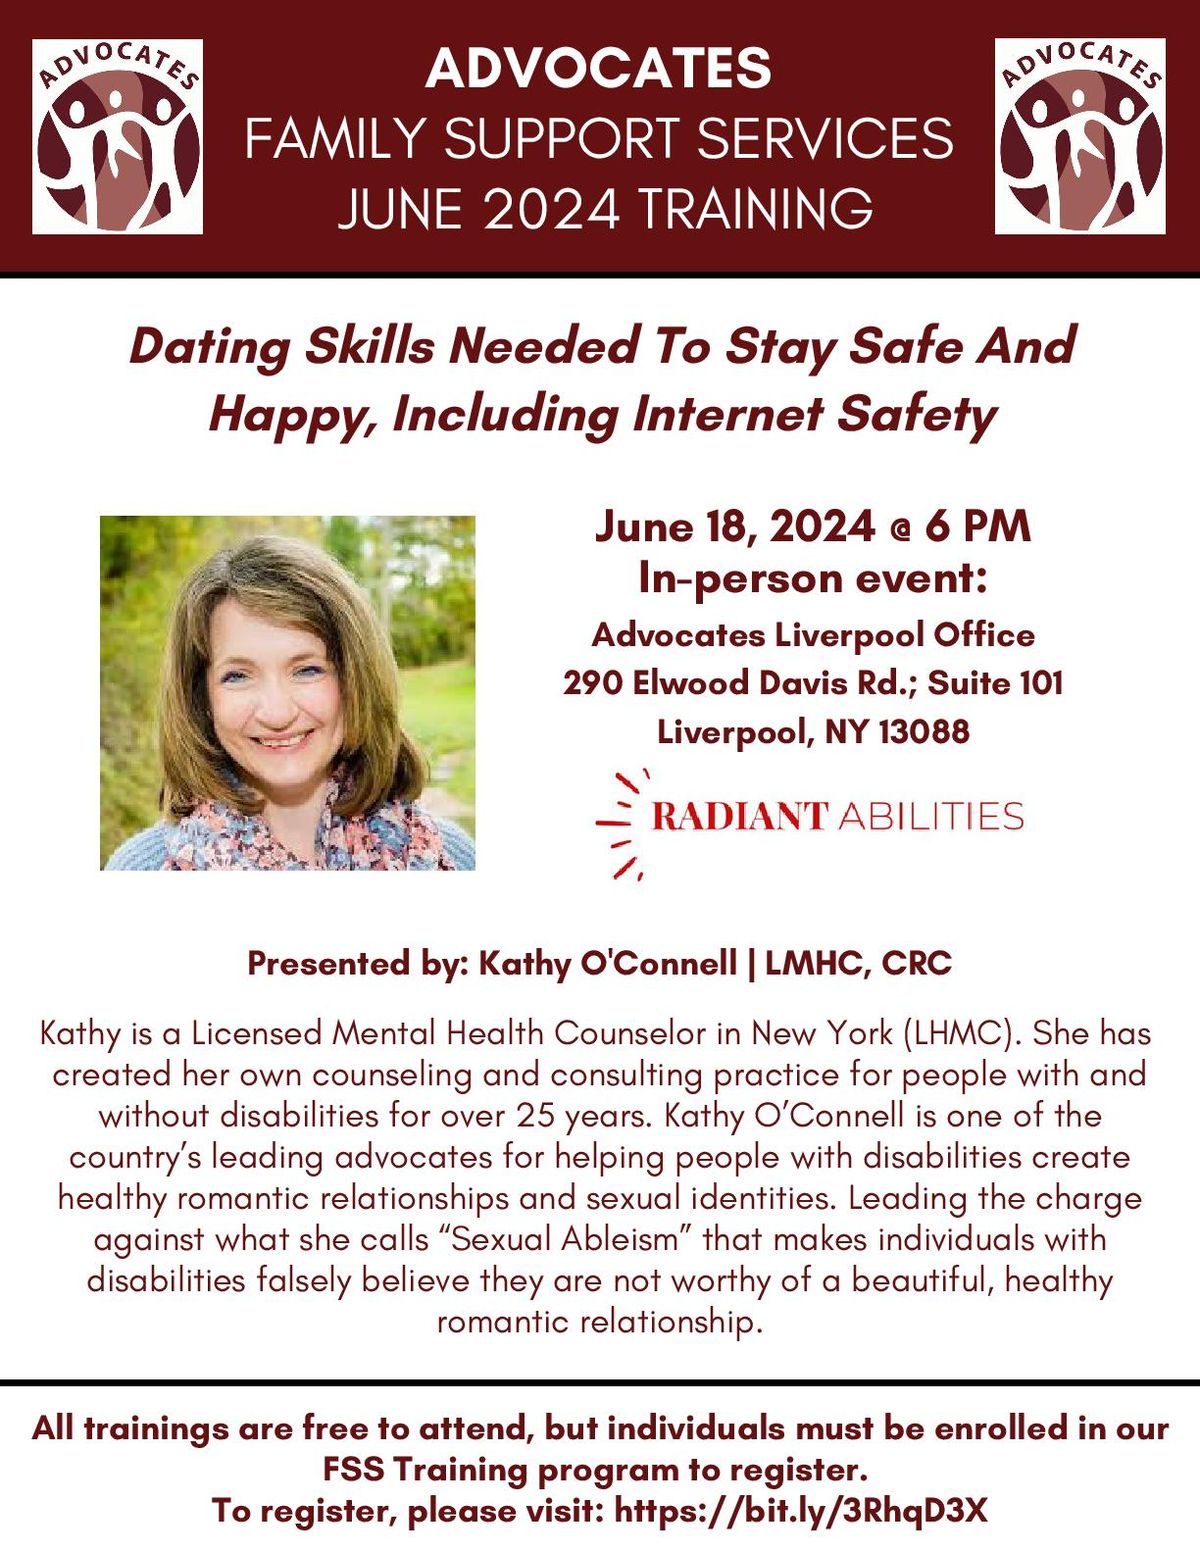 Advocates Training - Dating Skills Needed To Stay Safe And Happy, Including Internet Safety